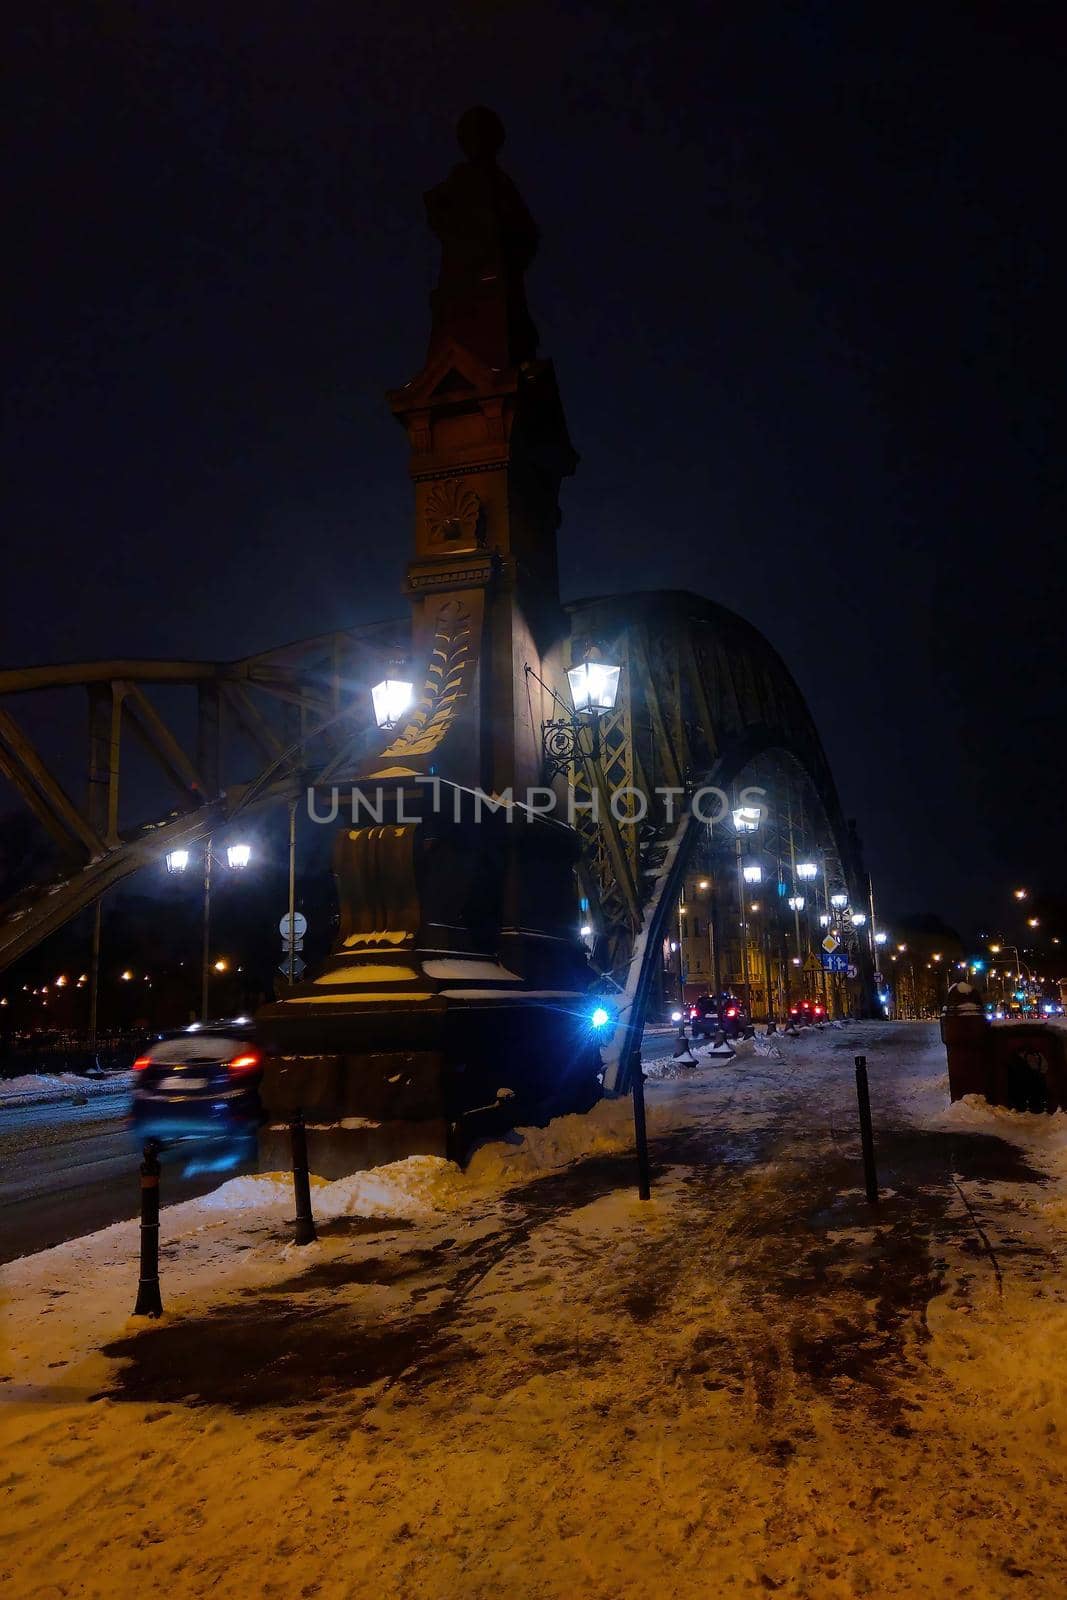 Old iron bridge over the river in the city in the evening